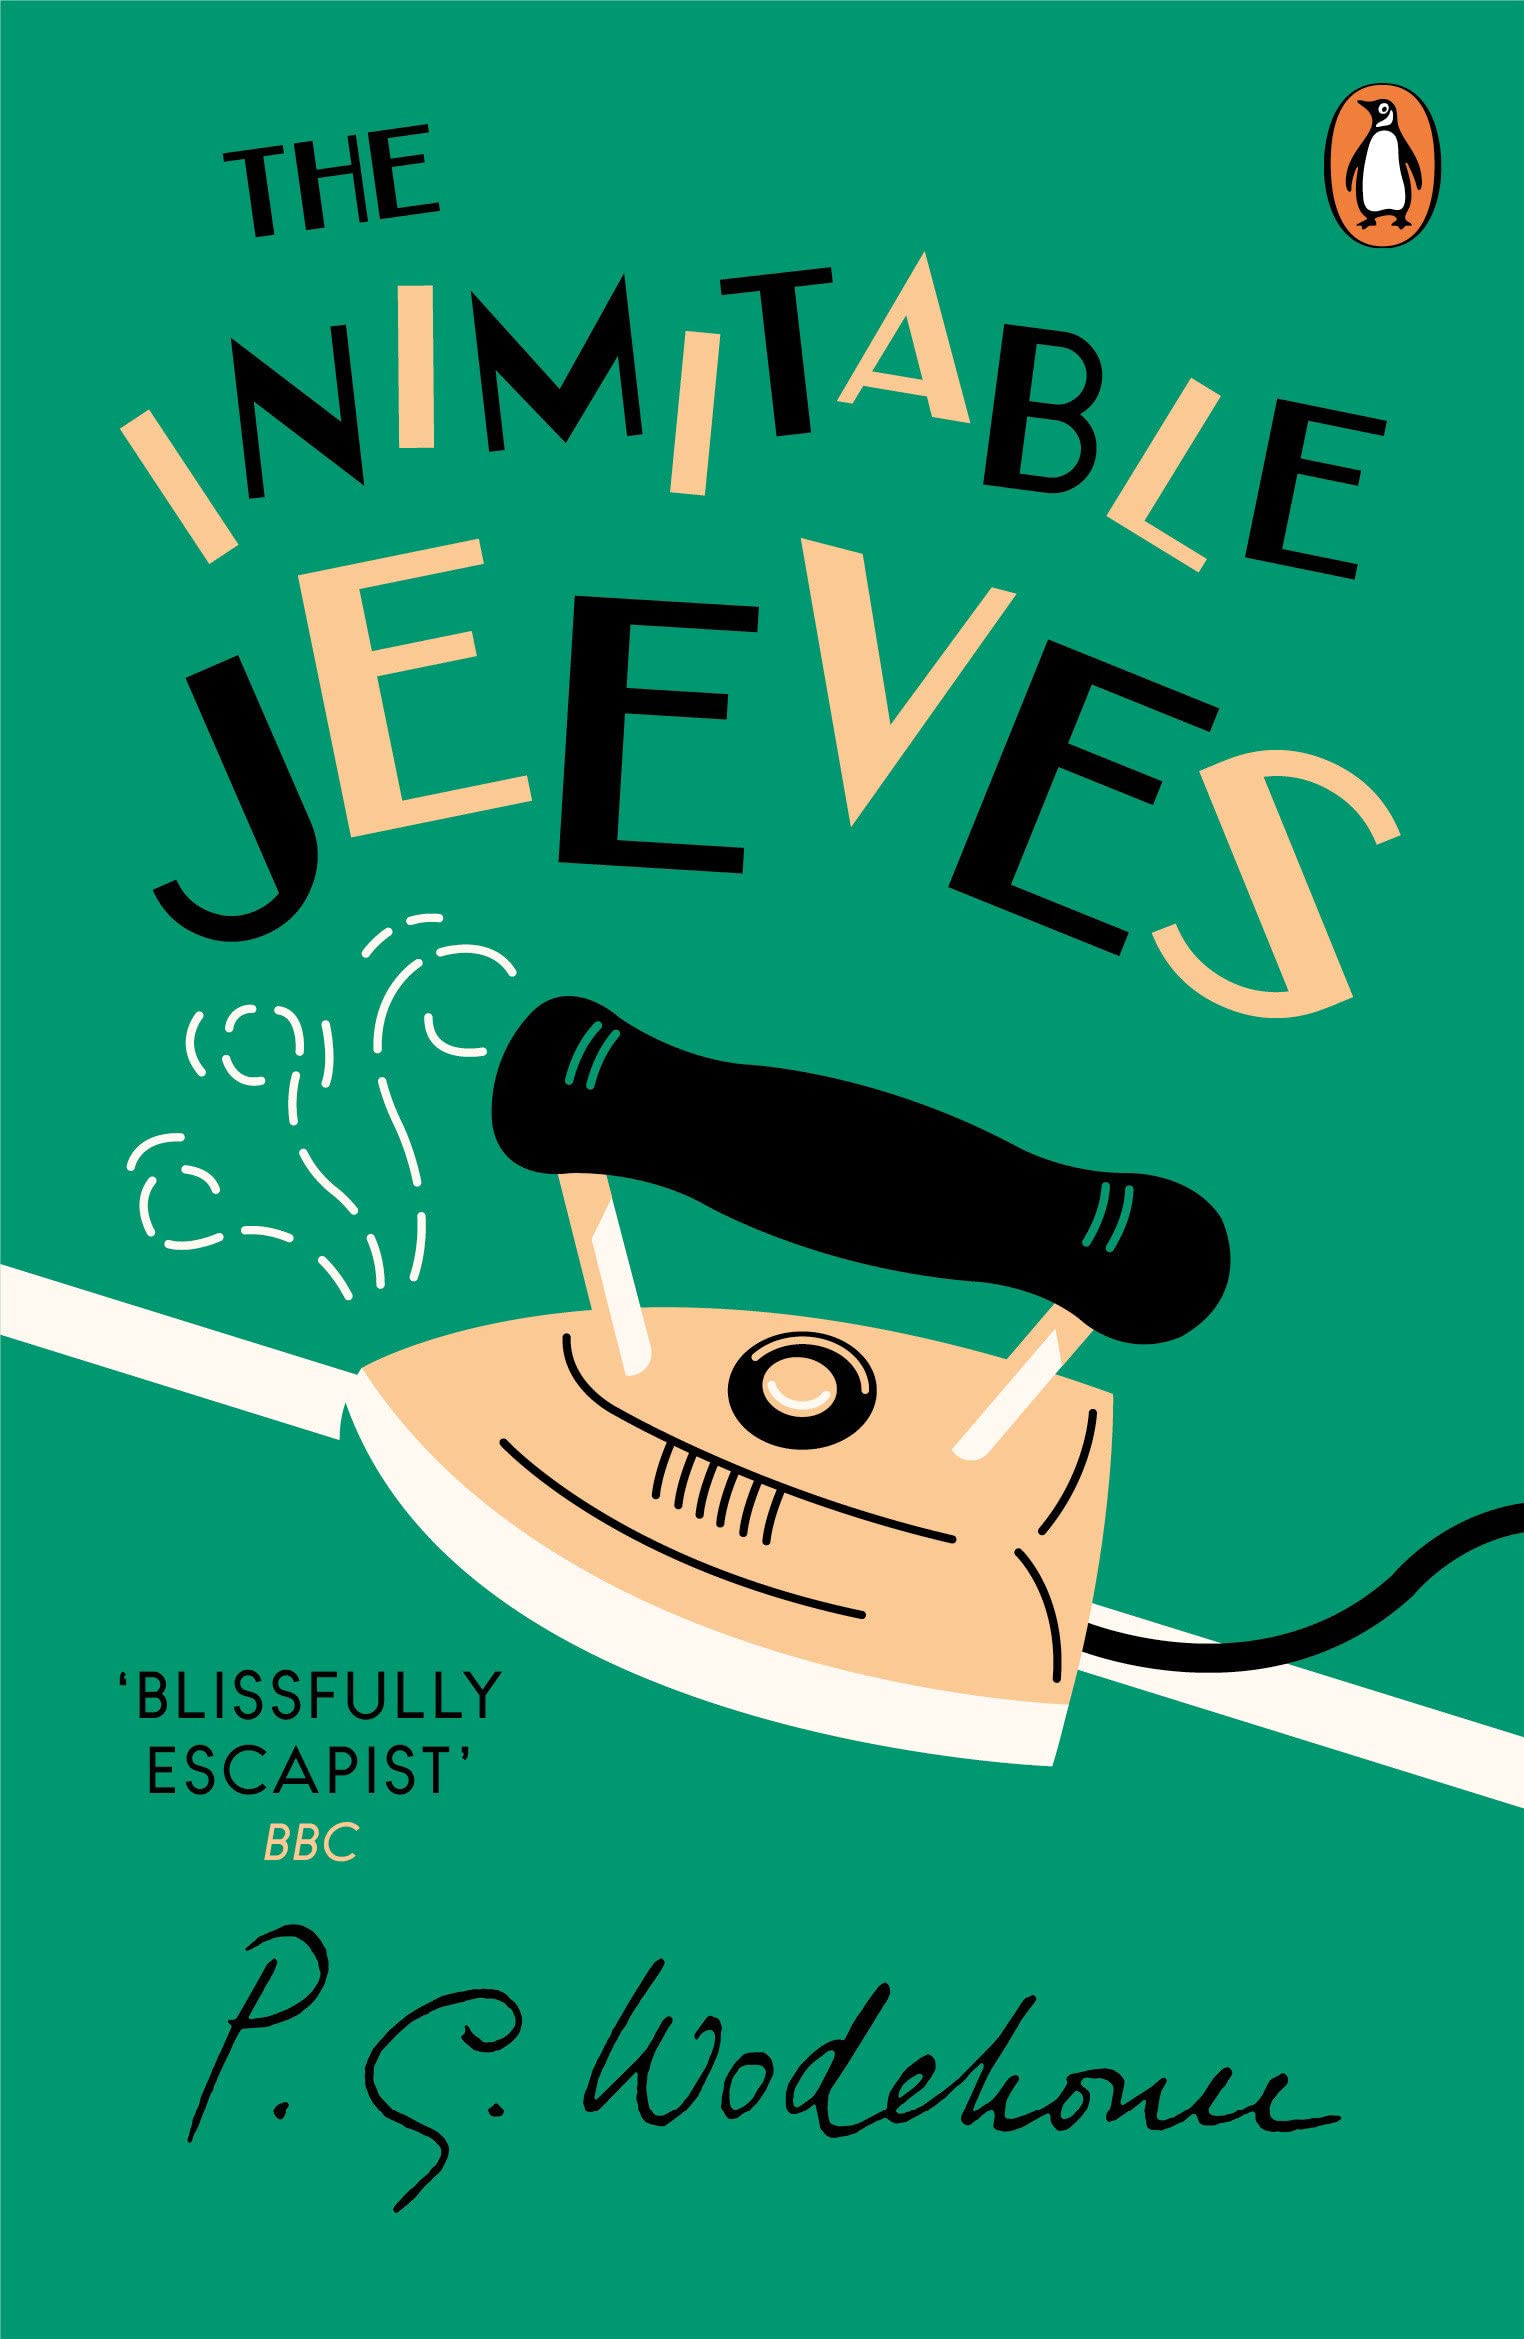 The Inimitable Jeeves | P.G. Wodehouse